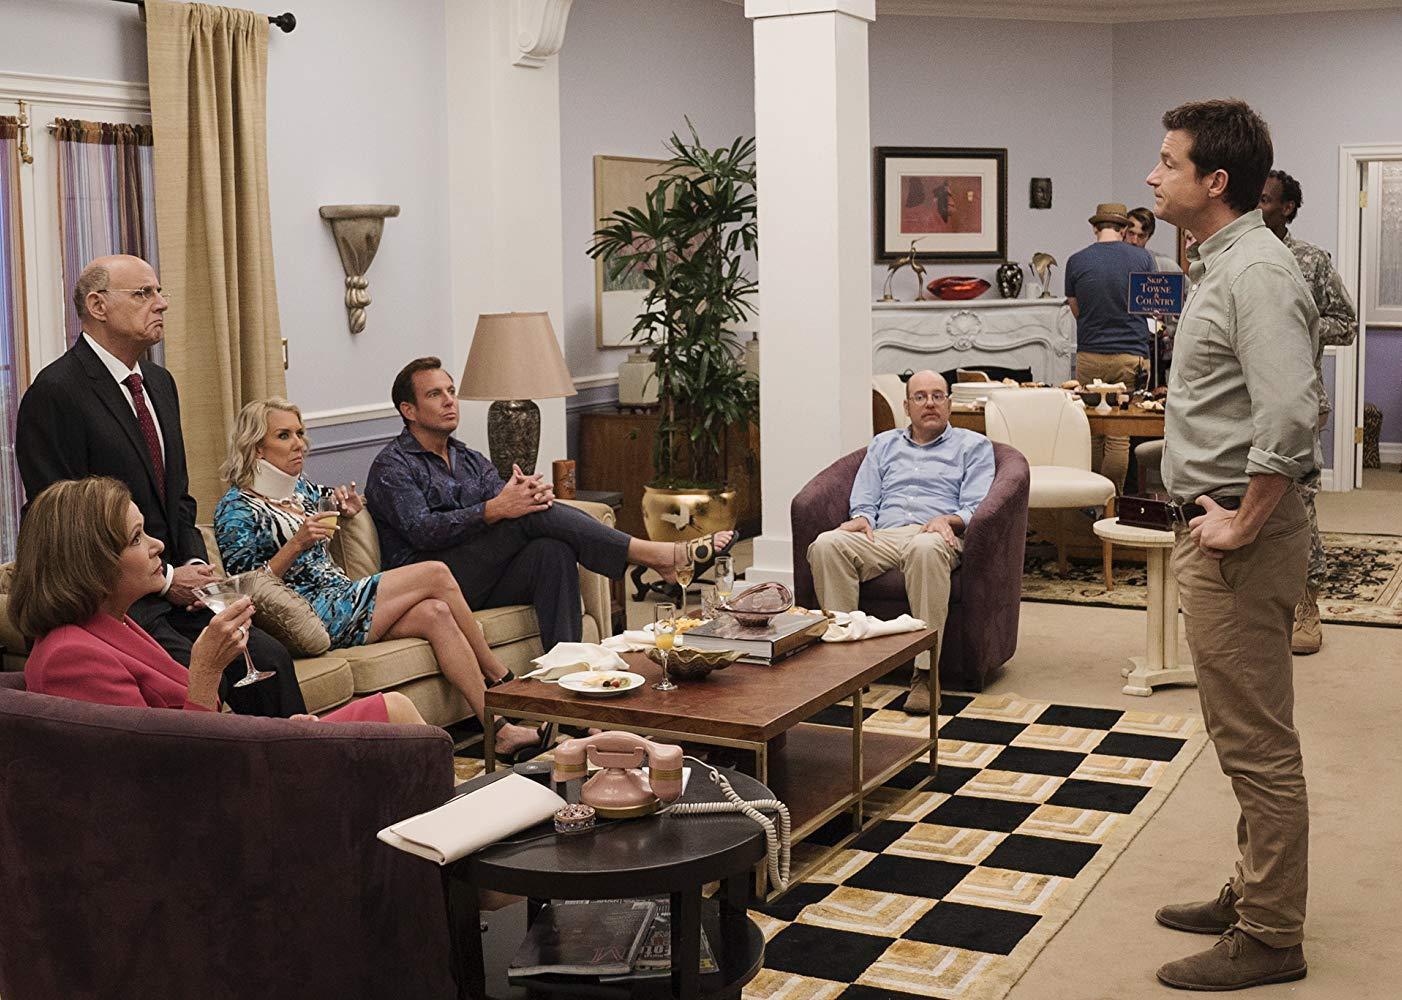 Actors in a scene from ‘Arrested Development’.